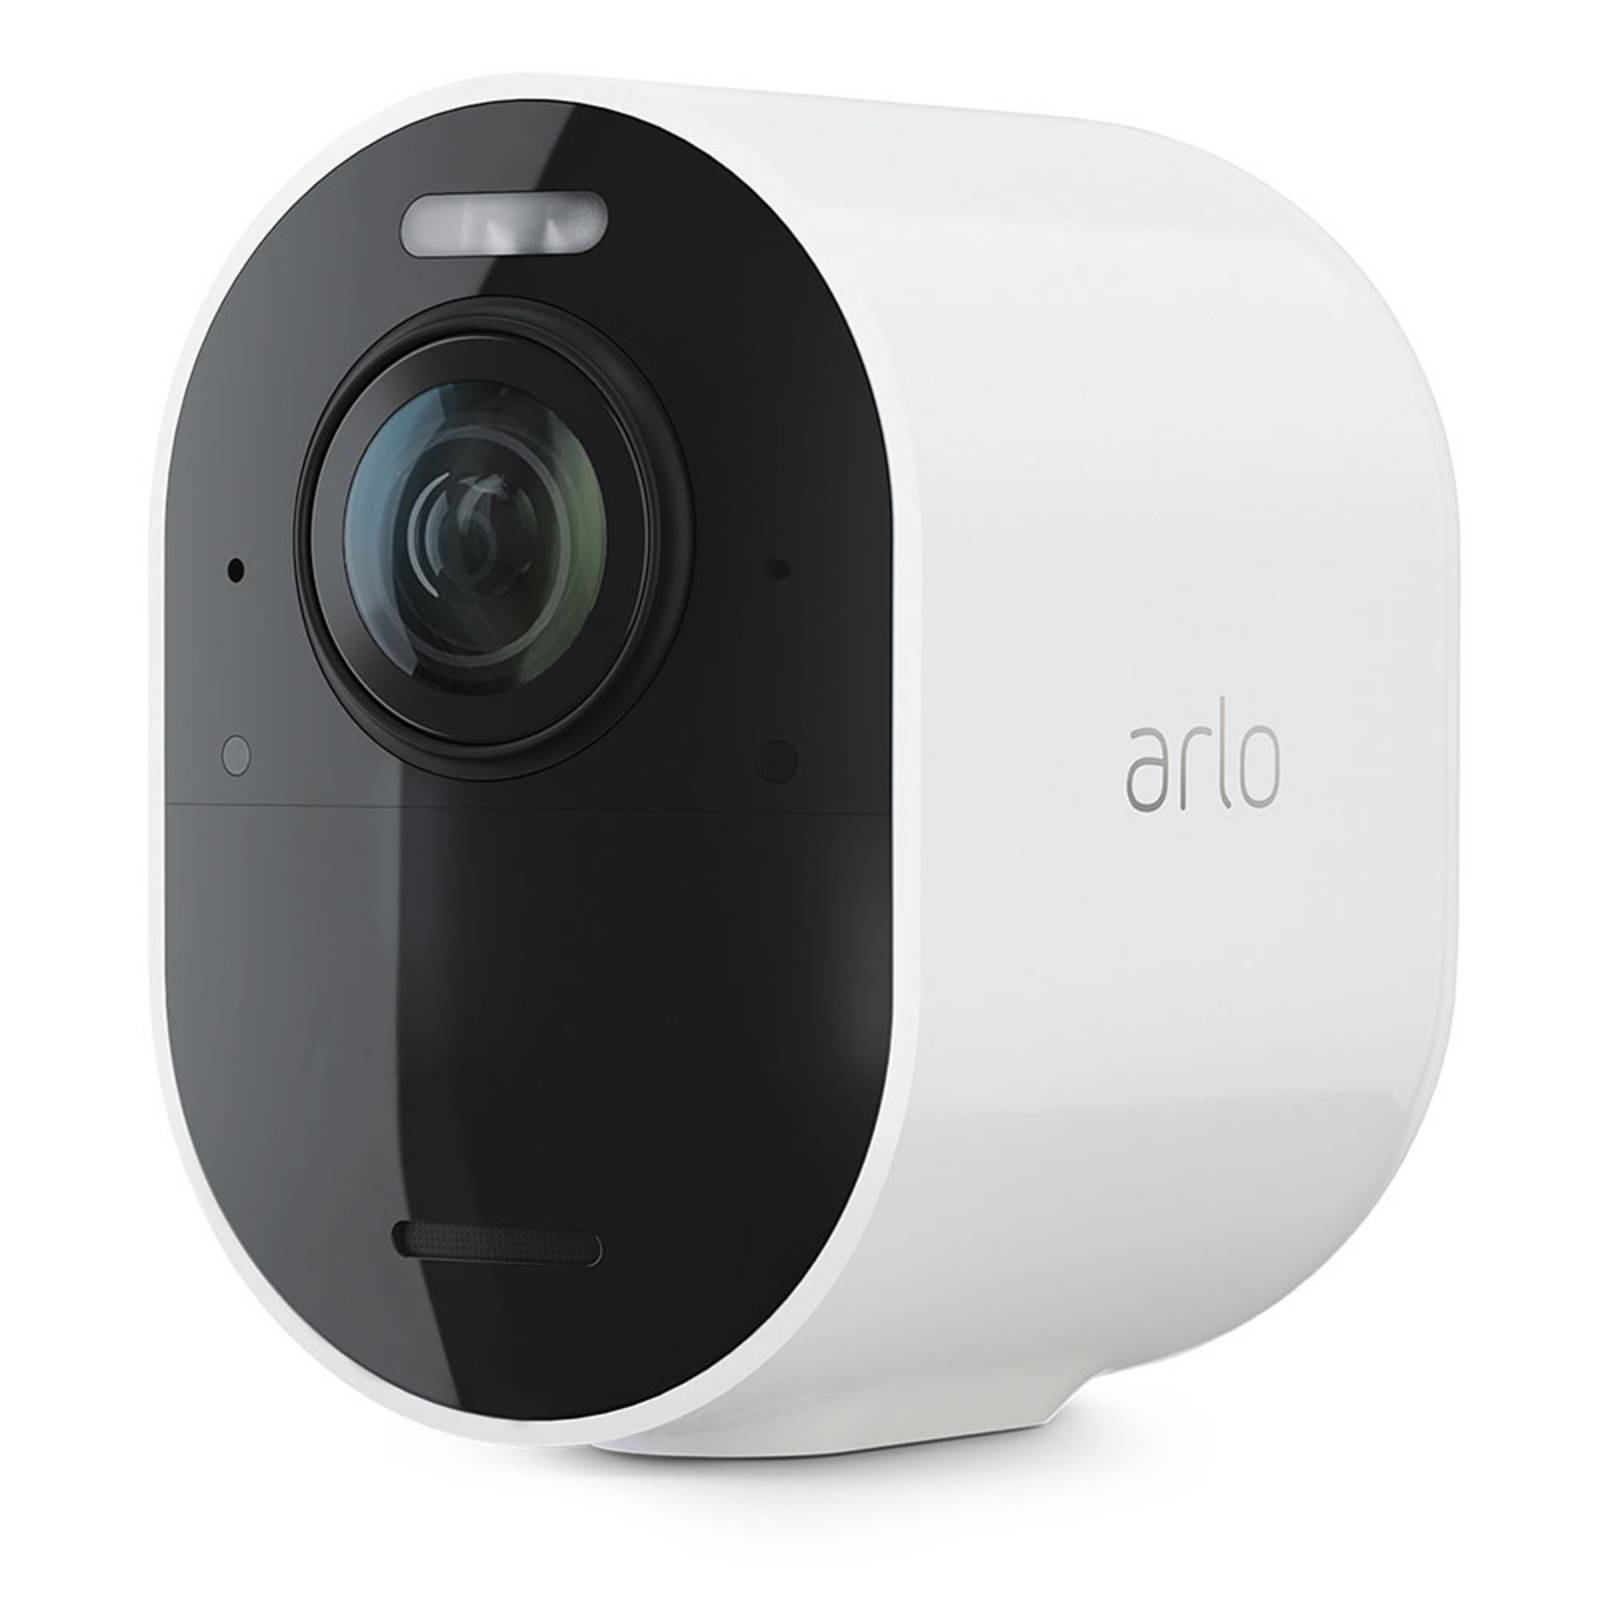 Image of Arlo Ultra 2 caméra supplémentaire, blanche 